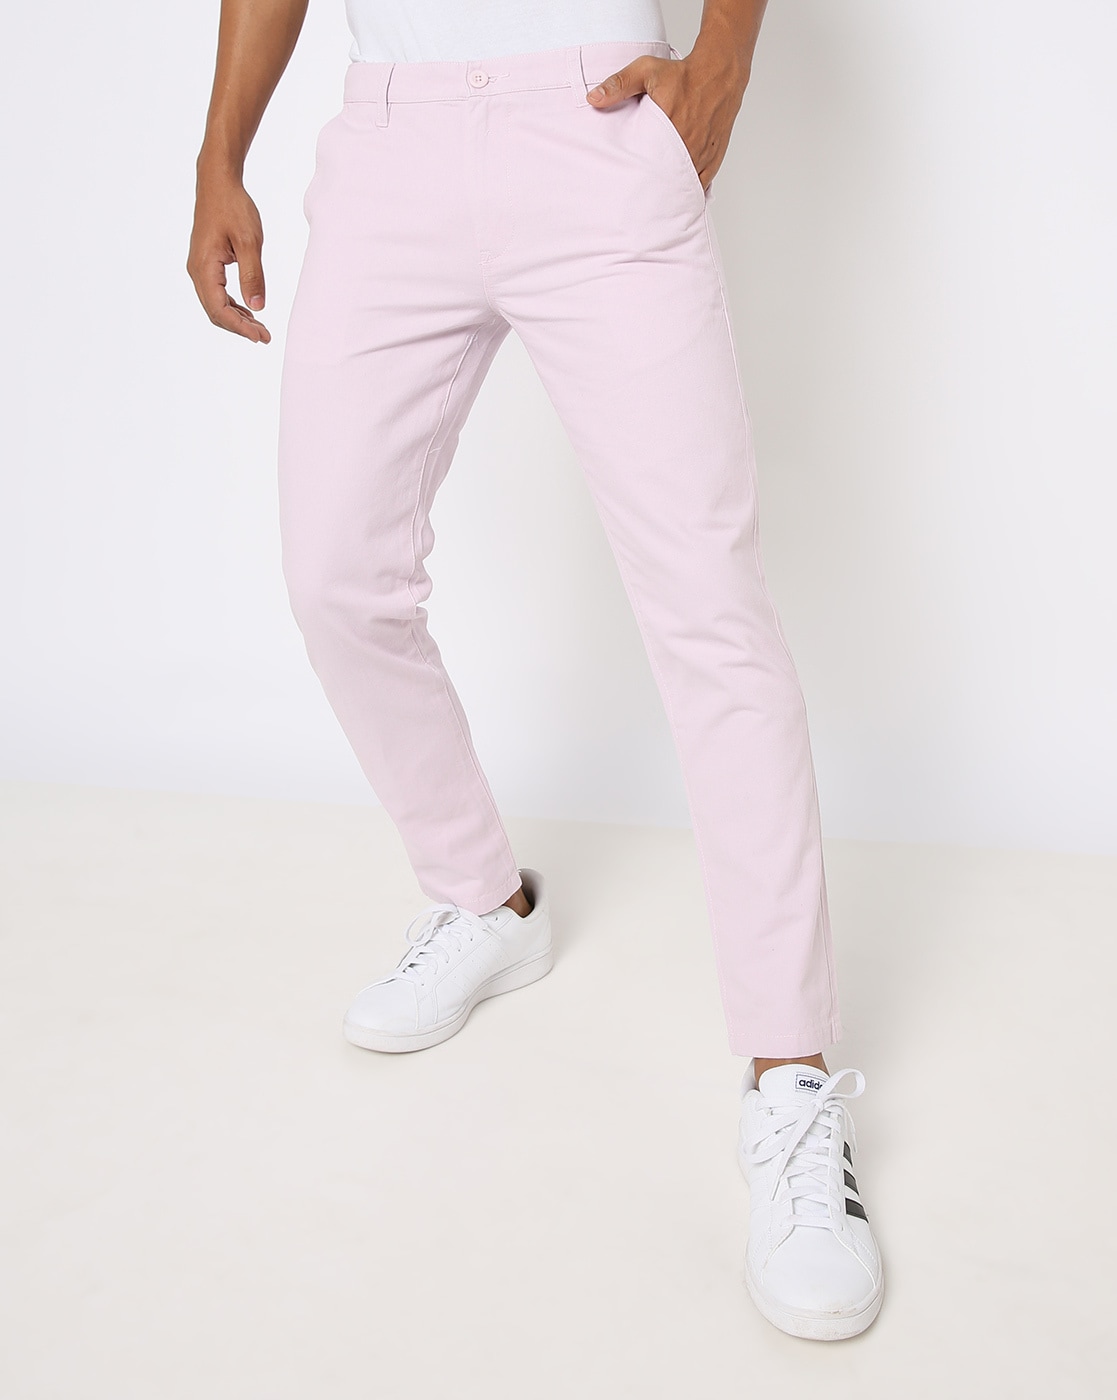 Pink Trousers – special offers for men at Boozt.com